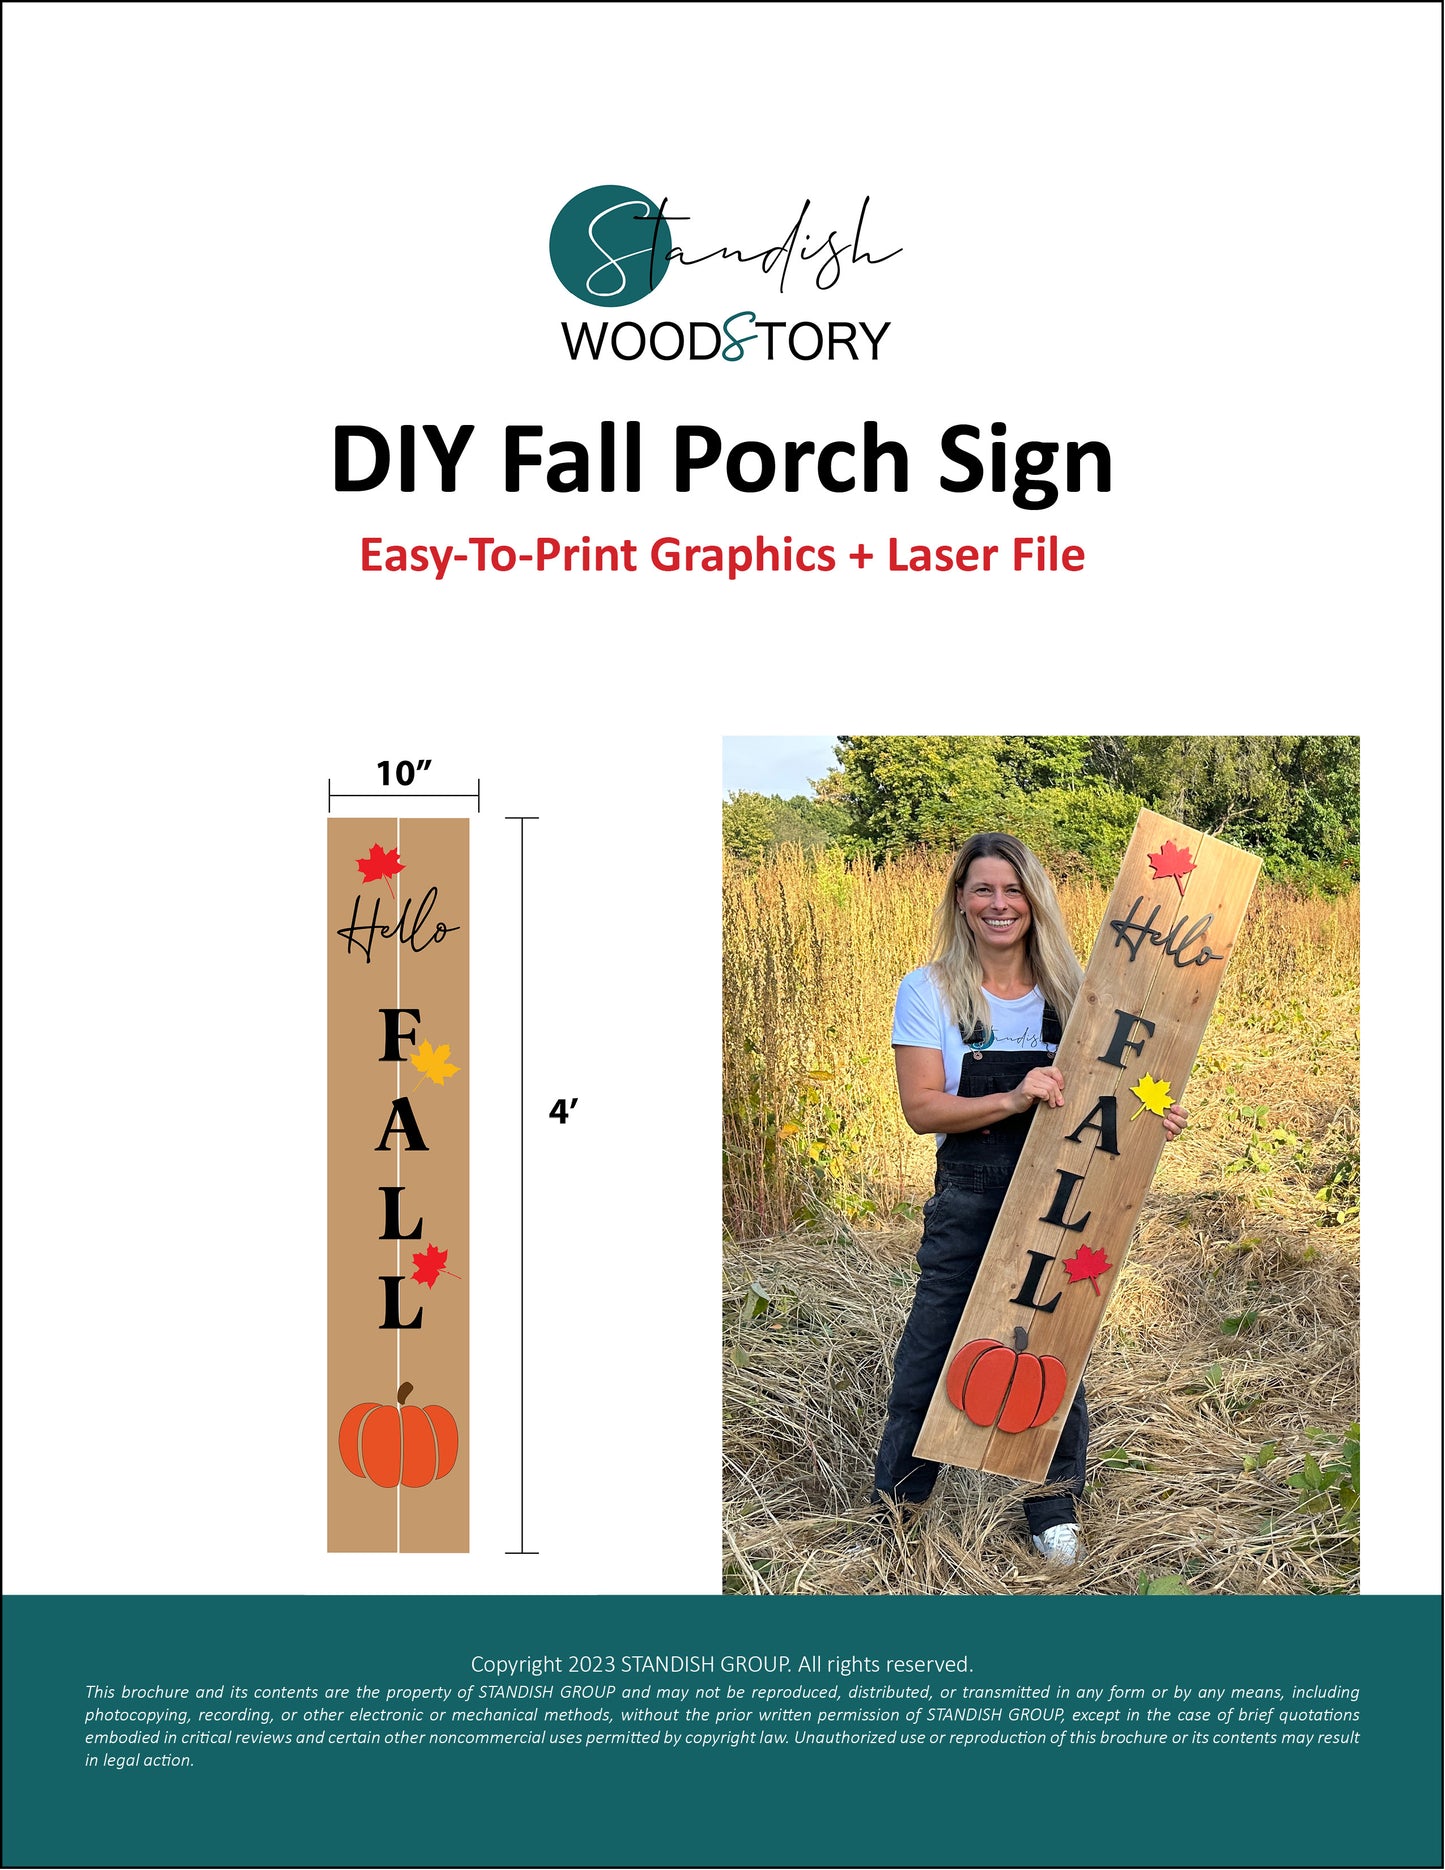 FREE Fall Sign Graphics Package (Print at home + Lightburn SVG)